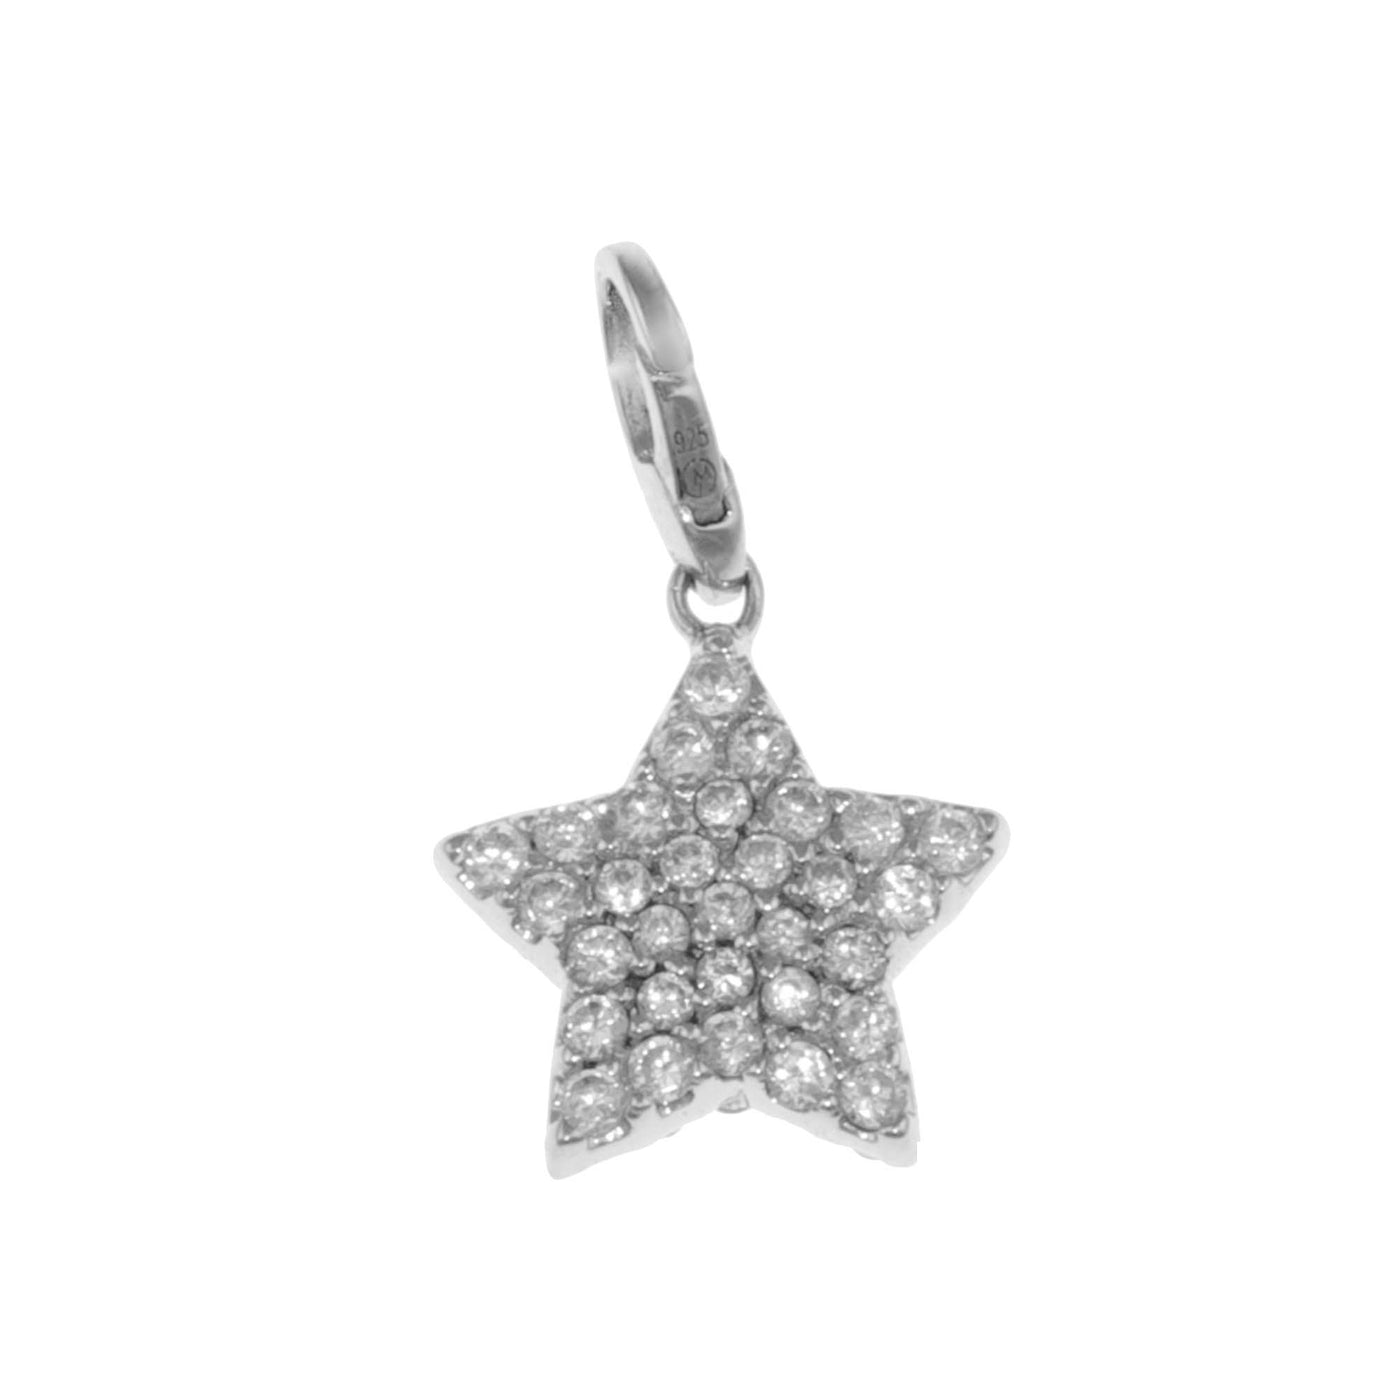 Rebecca Sloane Sterling Silver Large Star With White Cz Charm